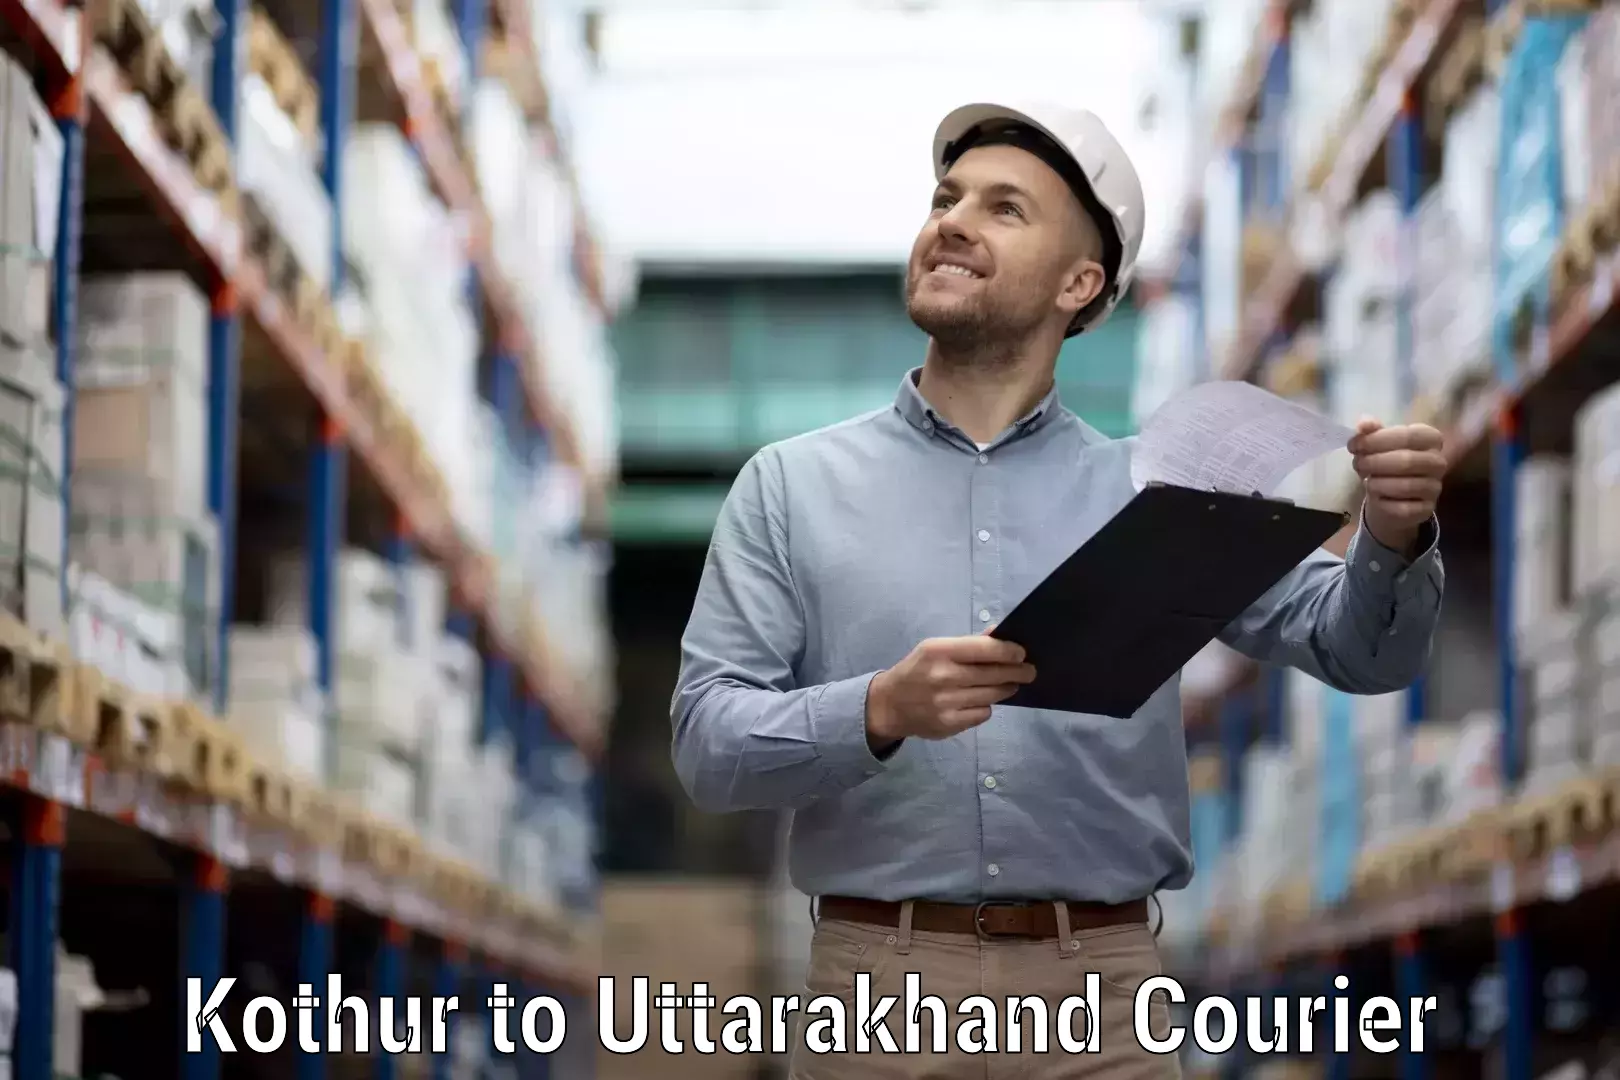 International courier networks Kothur to Pithoragarh